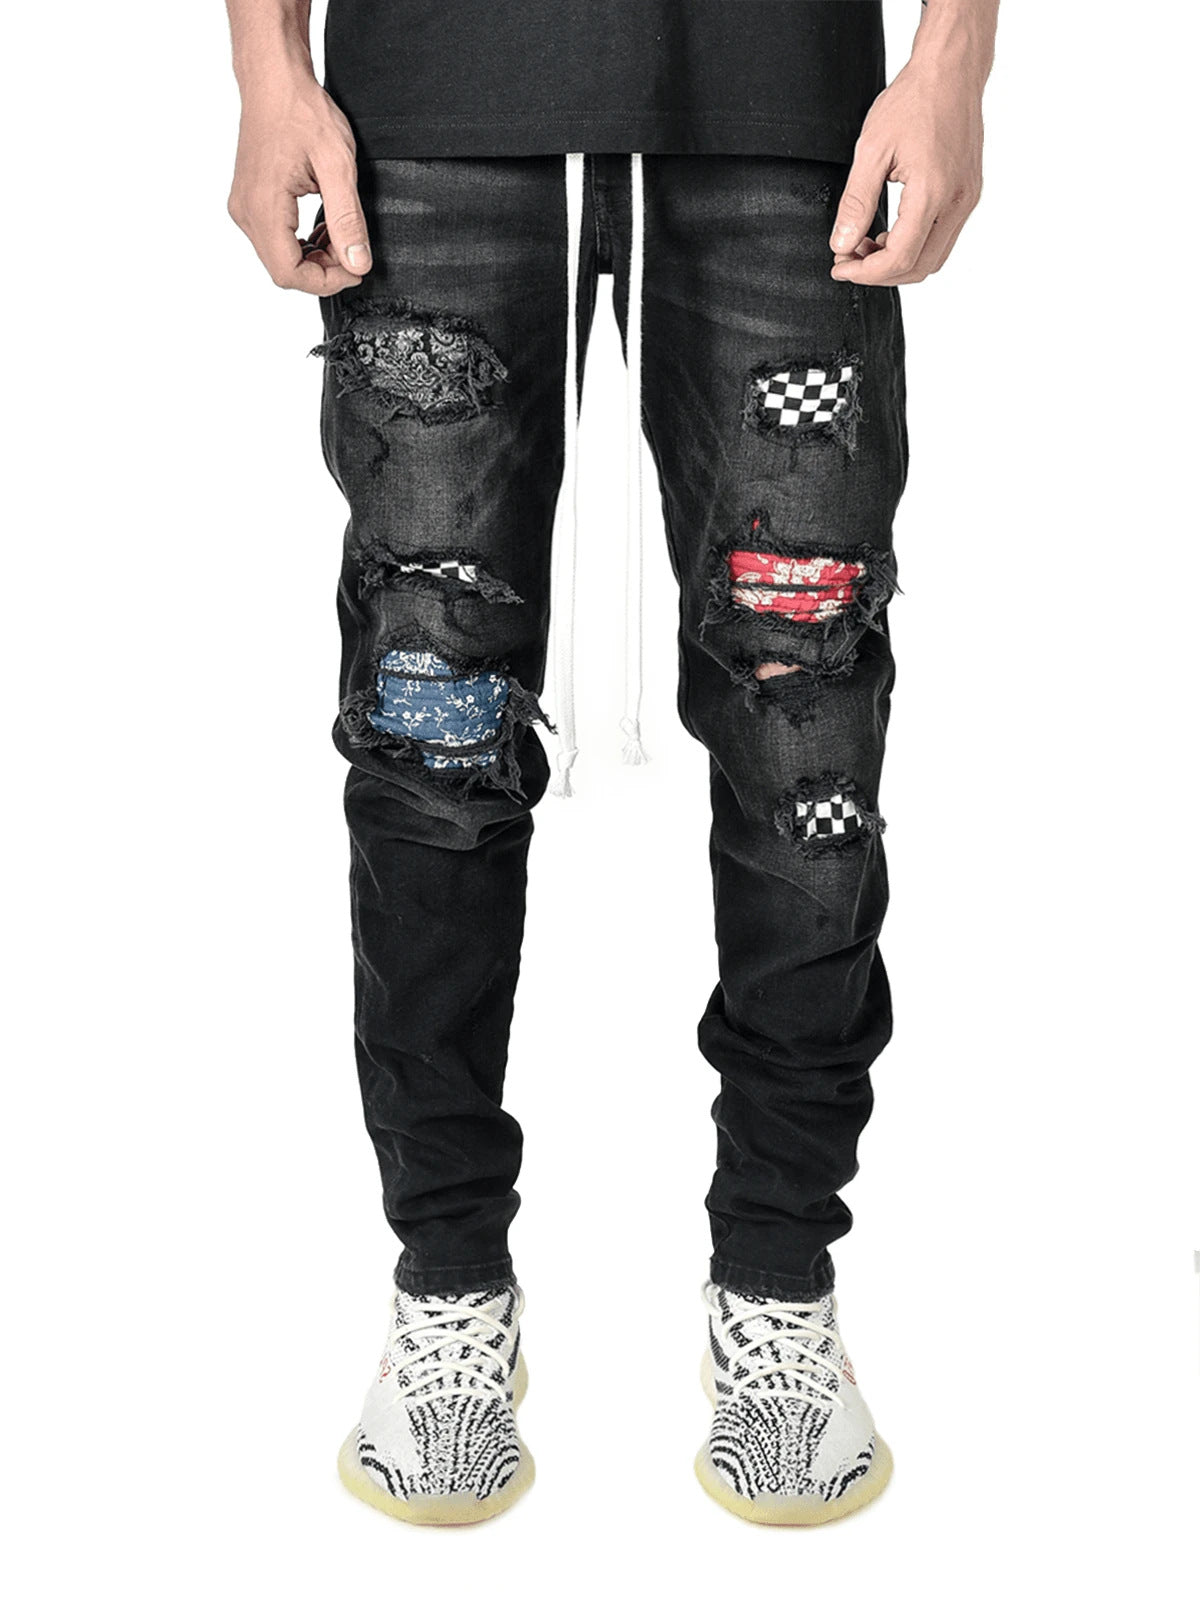 Ripped New High-End Slim-Fit Skinny Pants - Forever Growth 